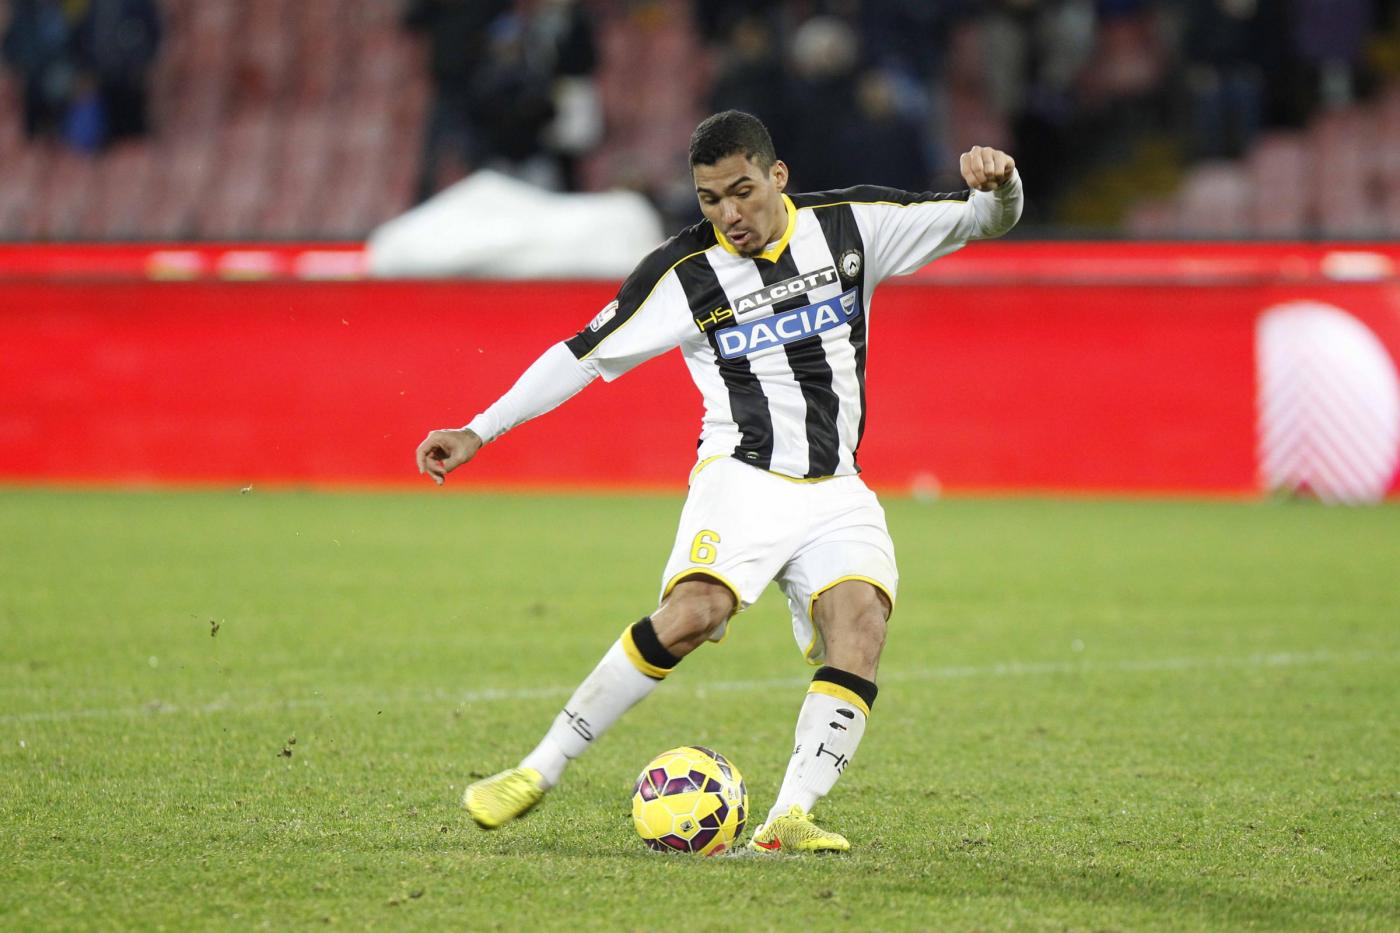 Udinese pres. : “Allan will stay with Udinese for another year”